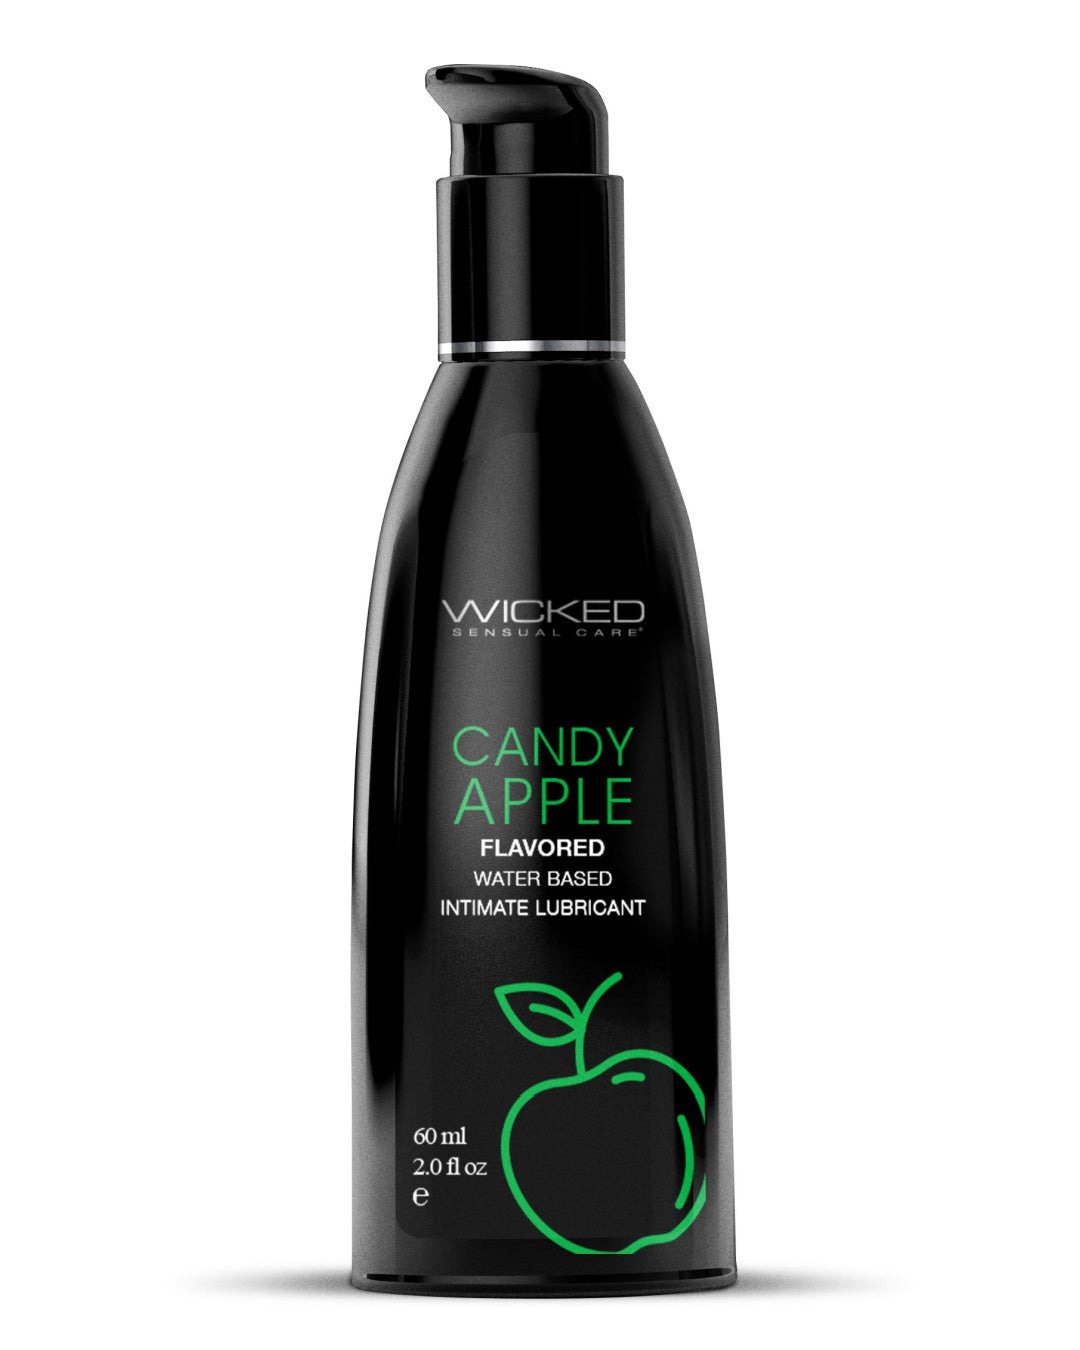 Wicked Aqua Candy Apple Lubricant 2 oz black bottle with green writing 